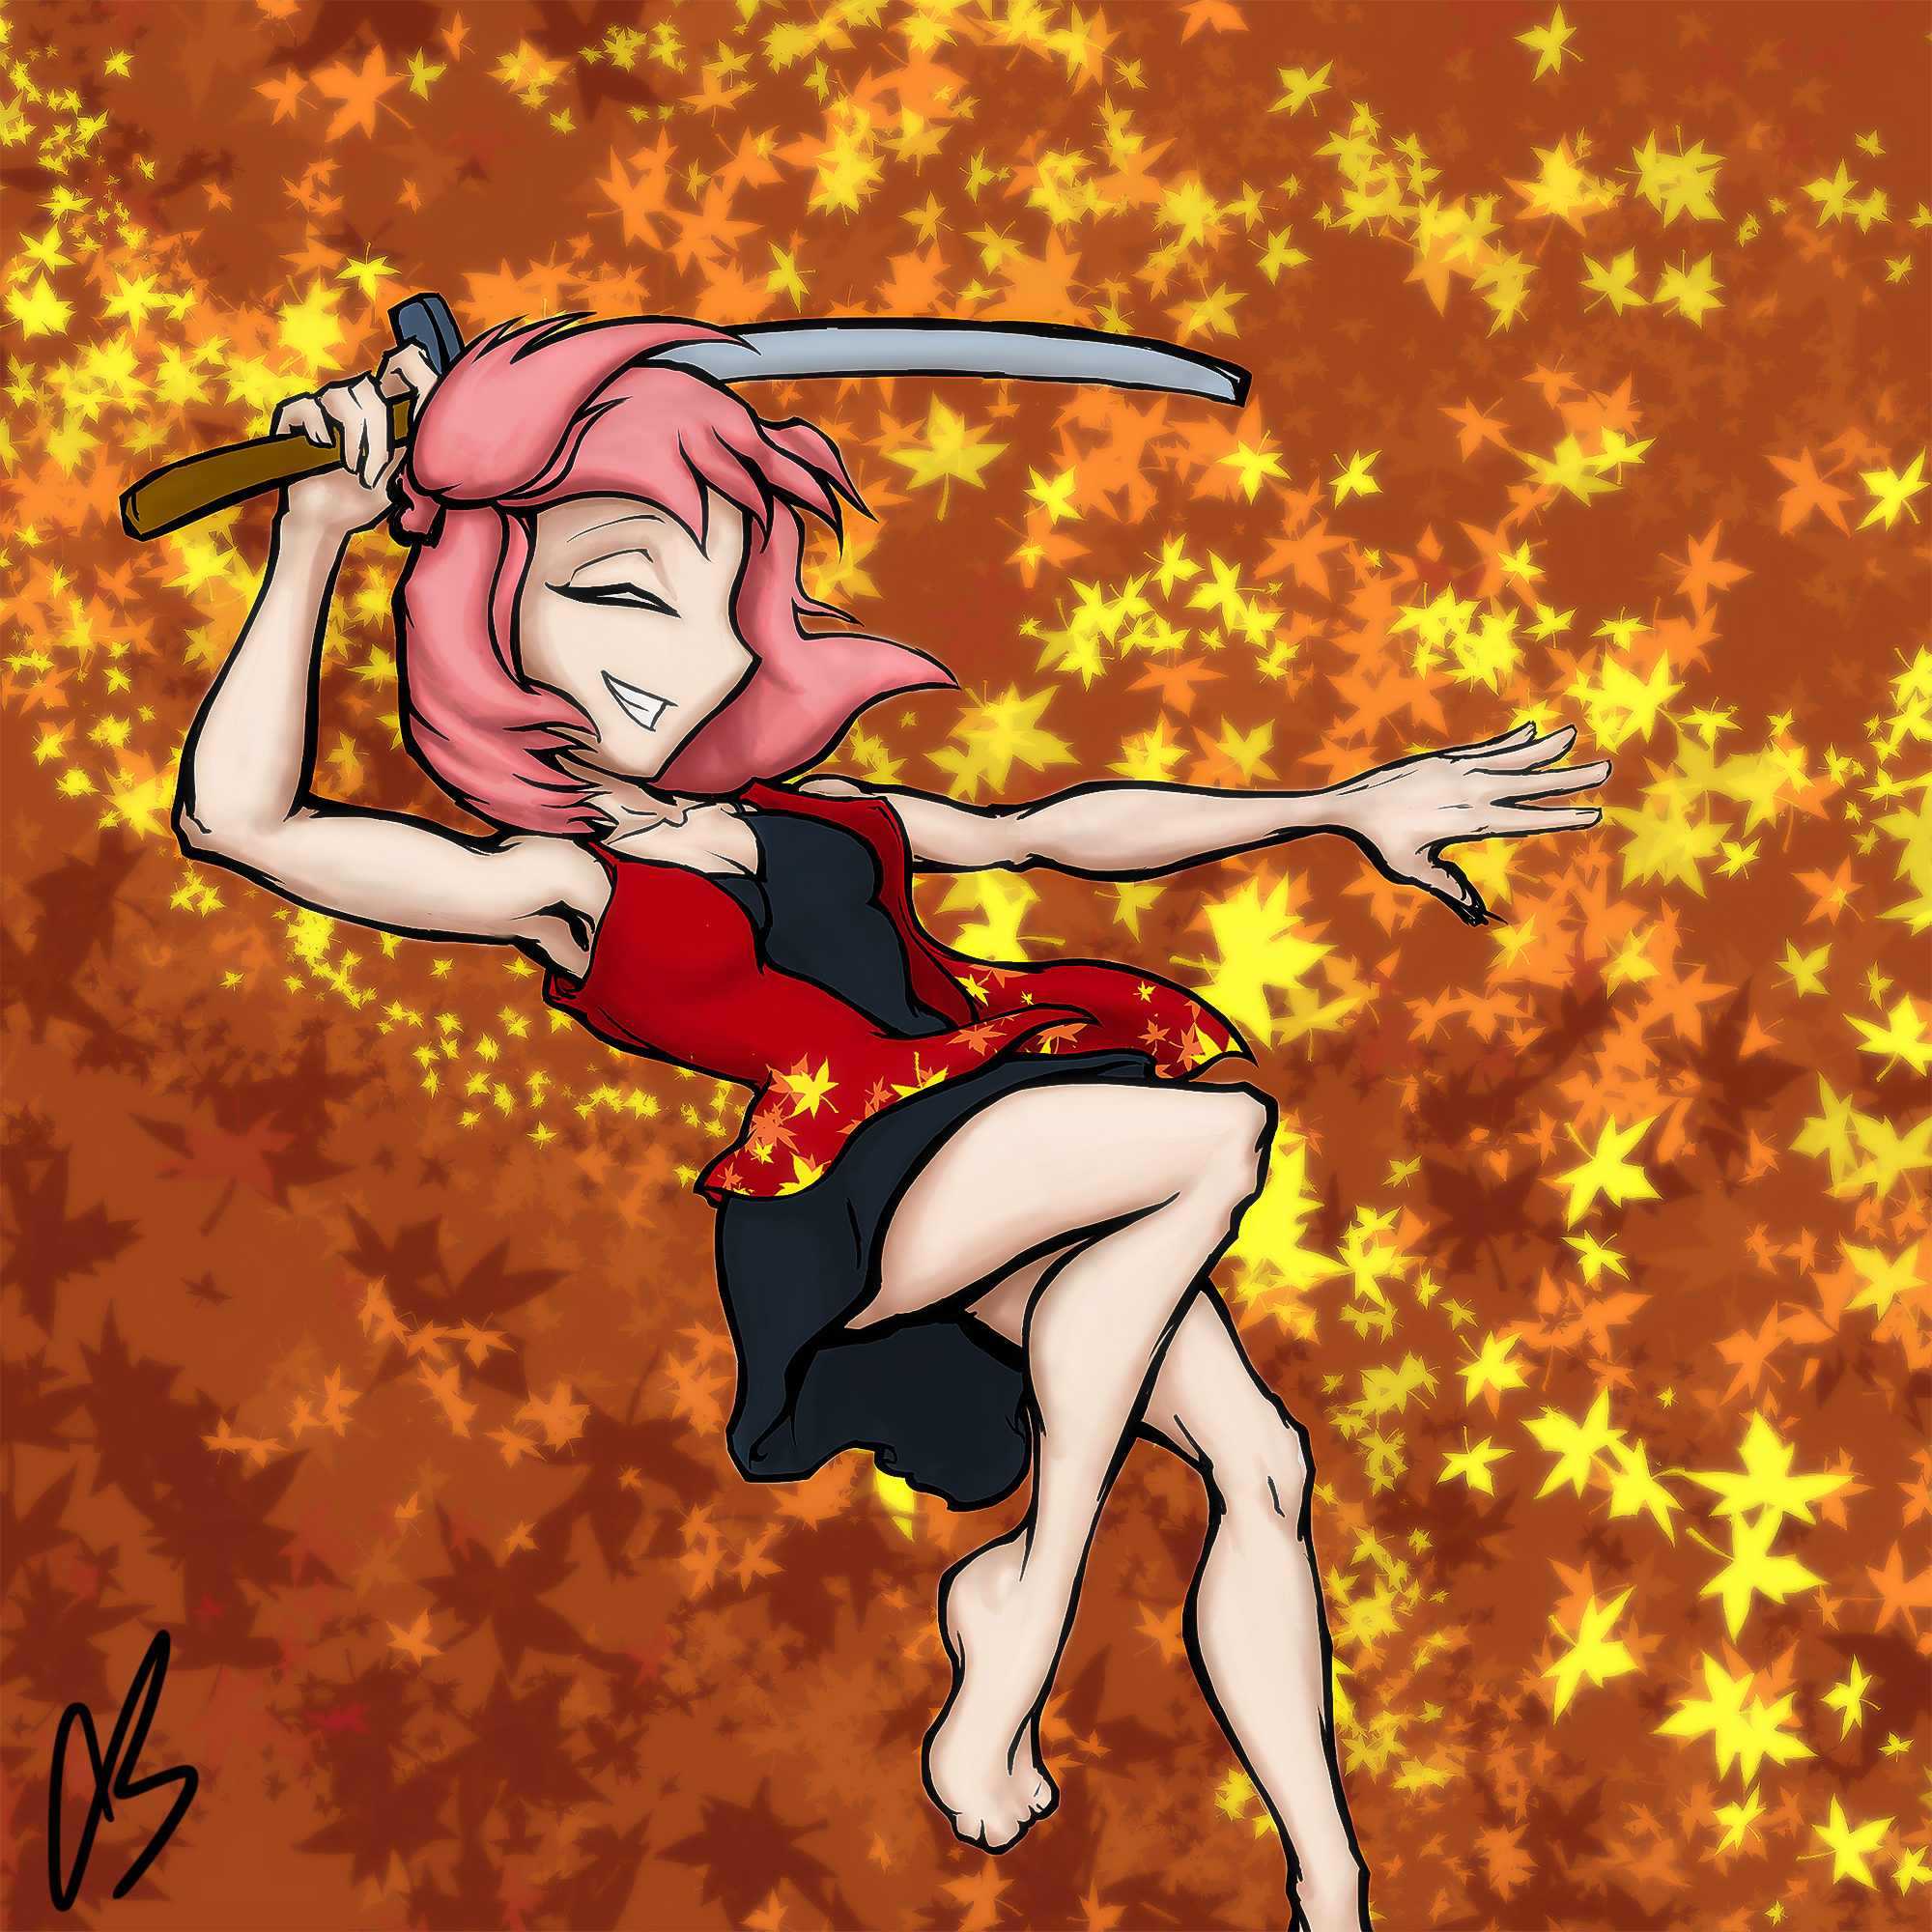 Aika in Autumn By CyberB